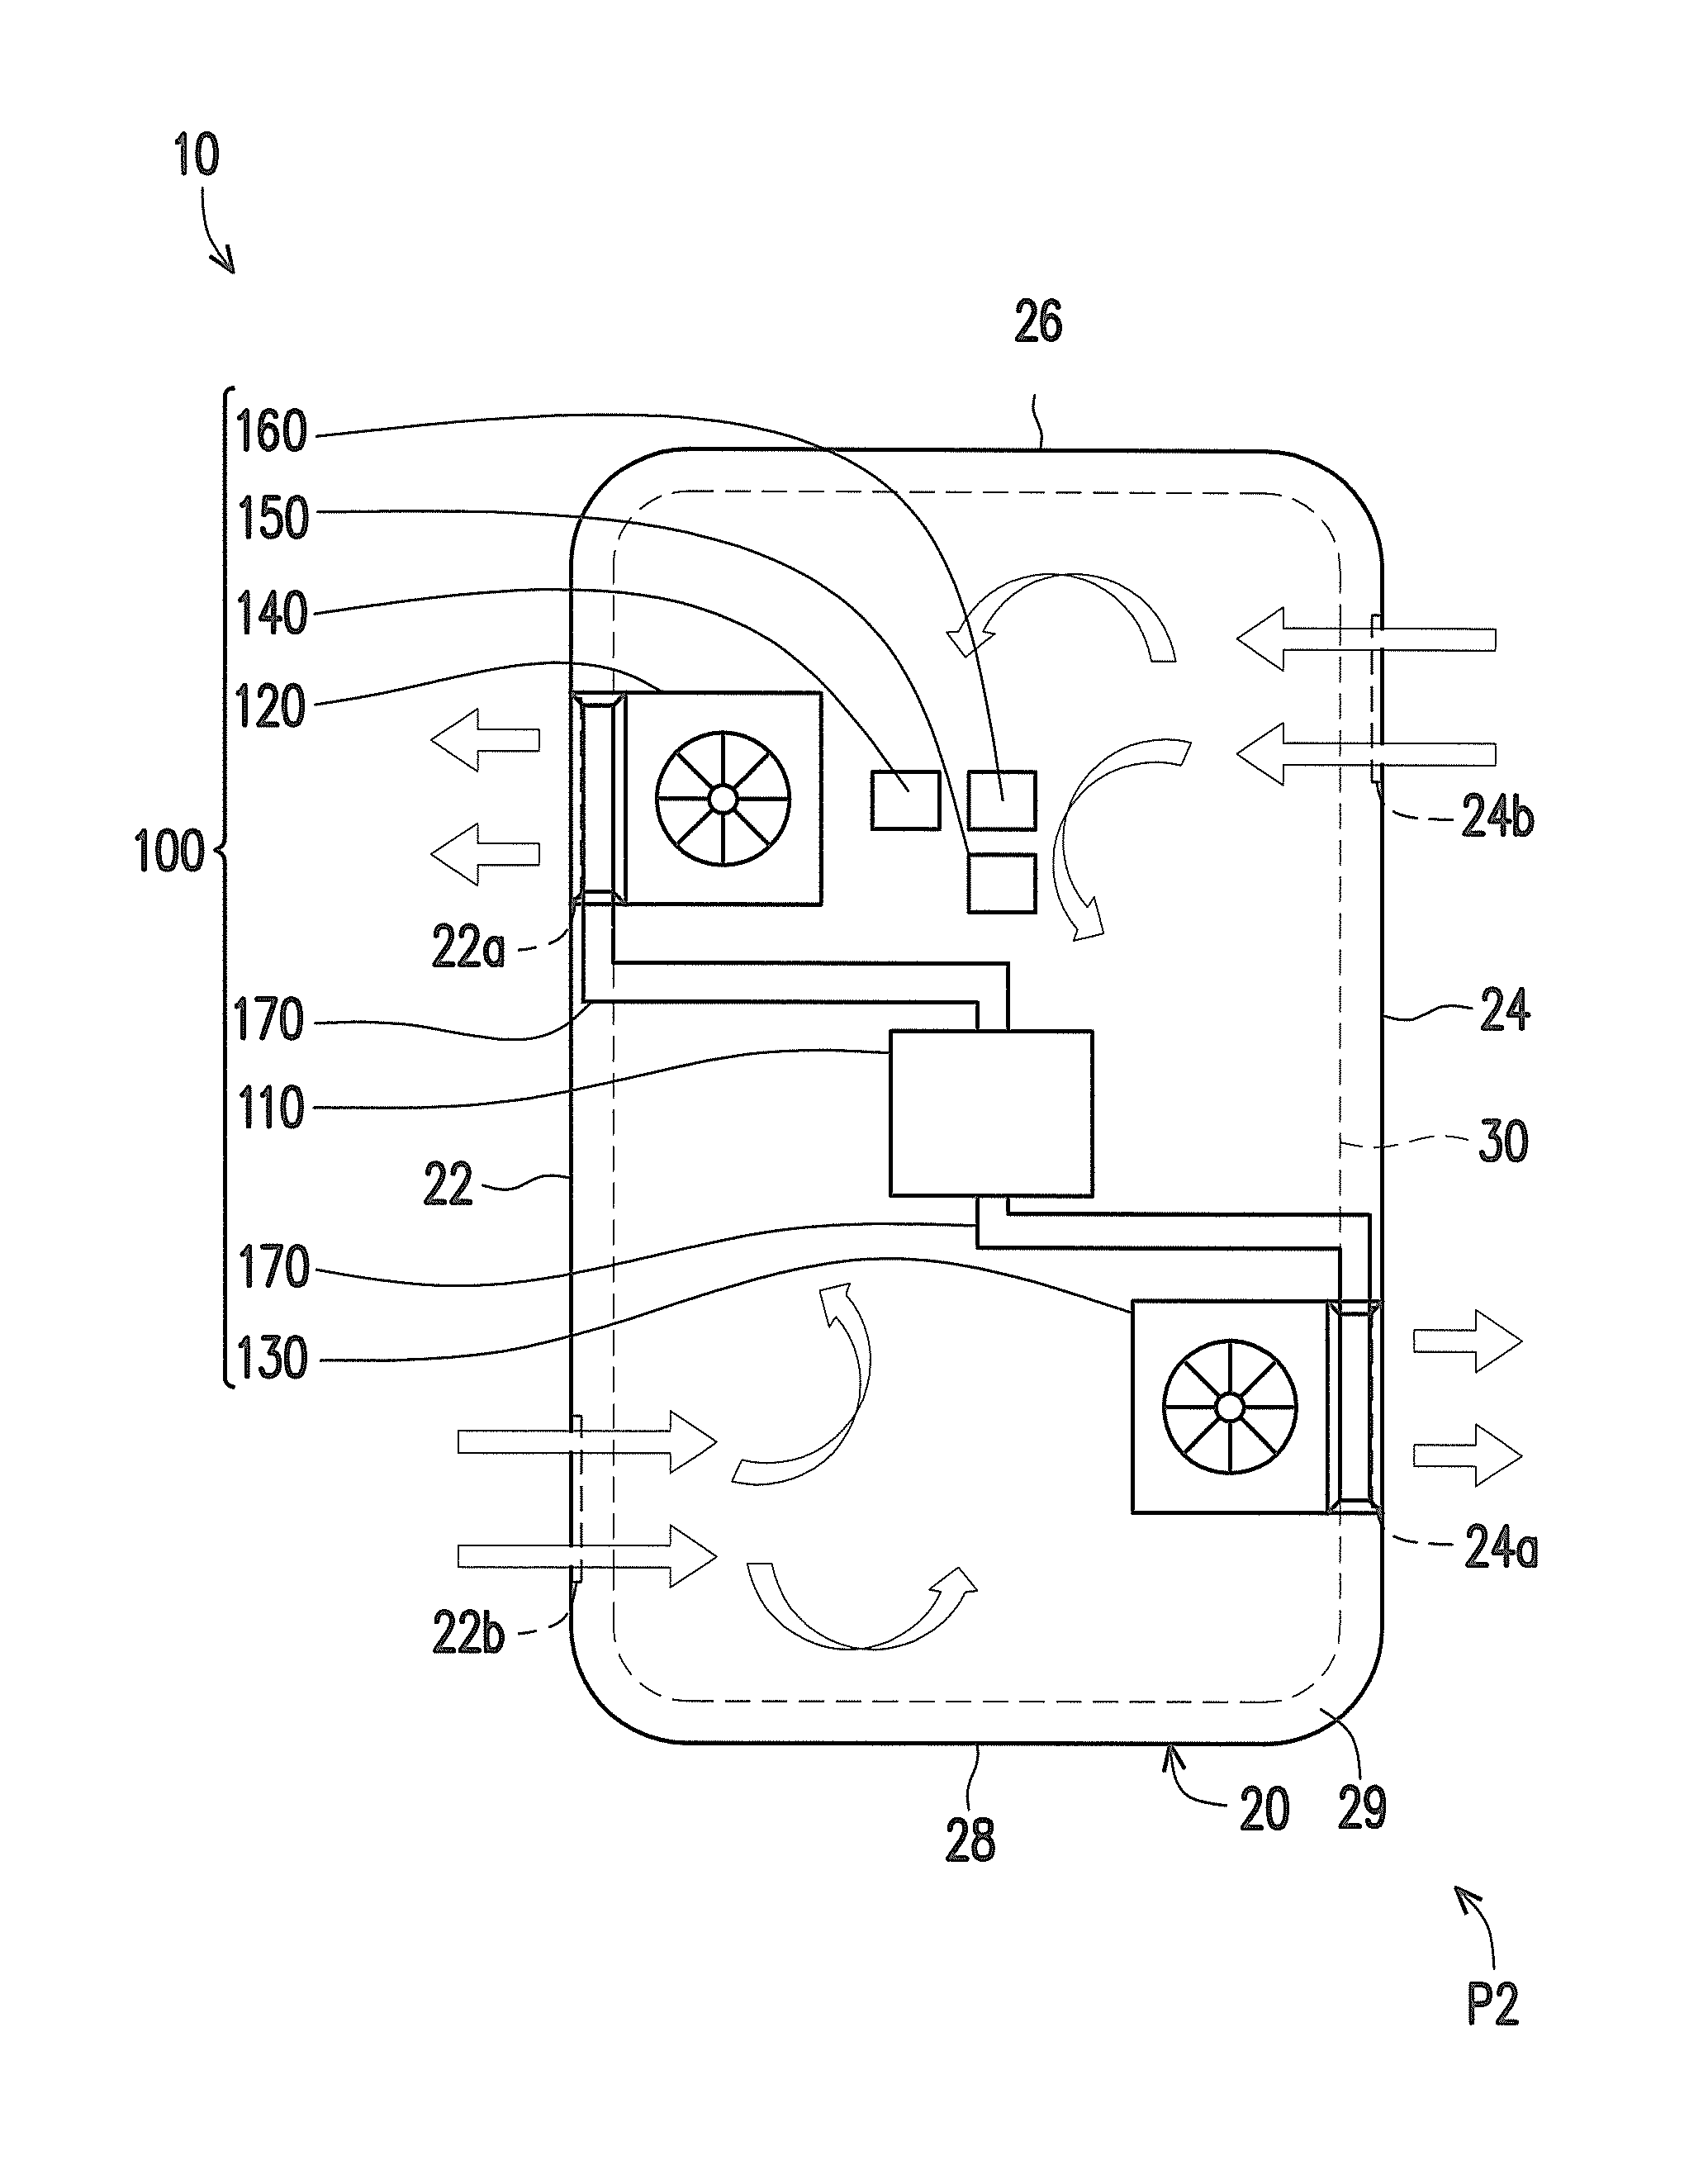 Heat dissipating system using fans